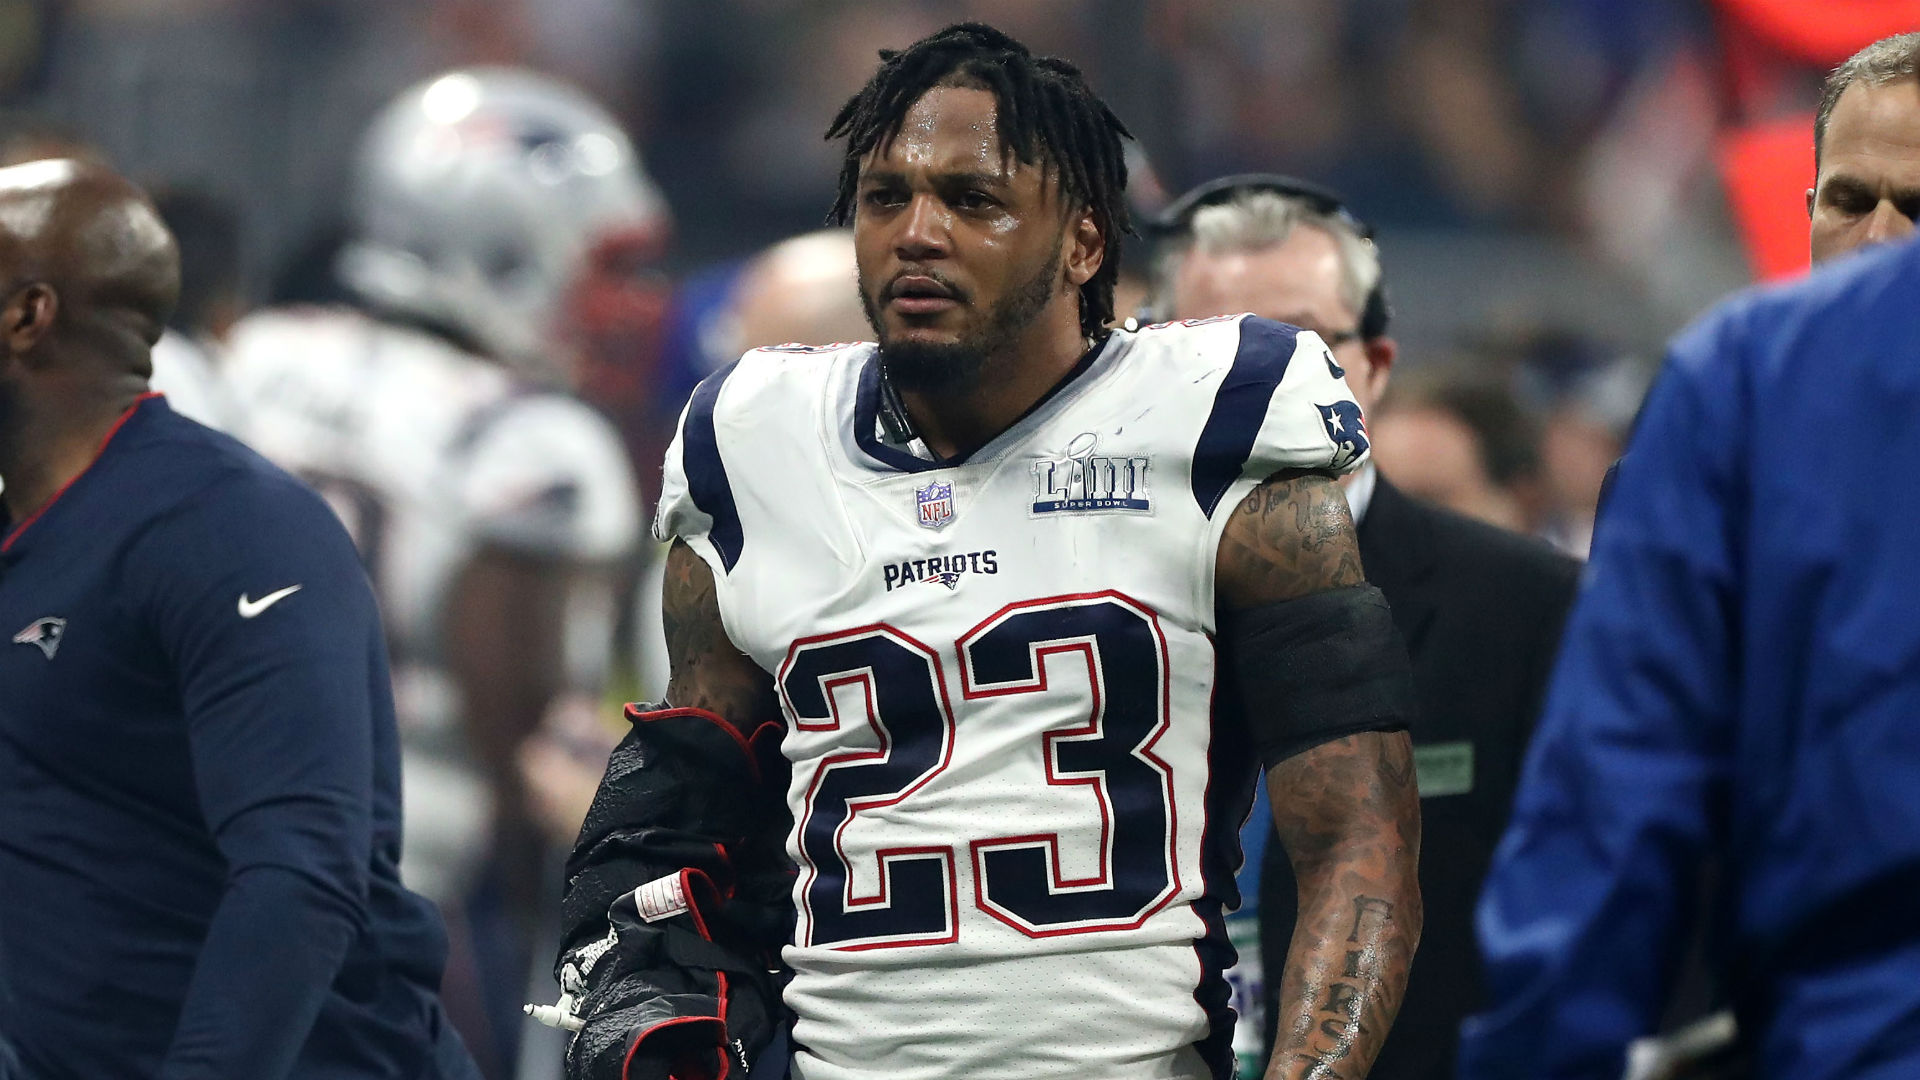 Patrick Chung injury update: Patriots safety to have multiple surgeries after leaving Super Bowl early